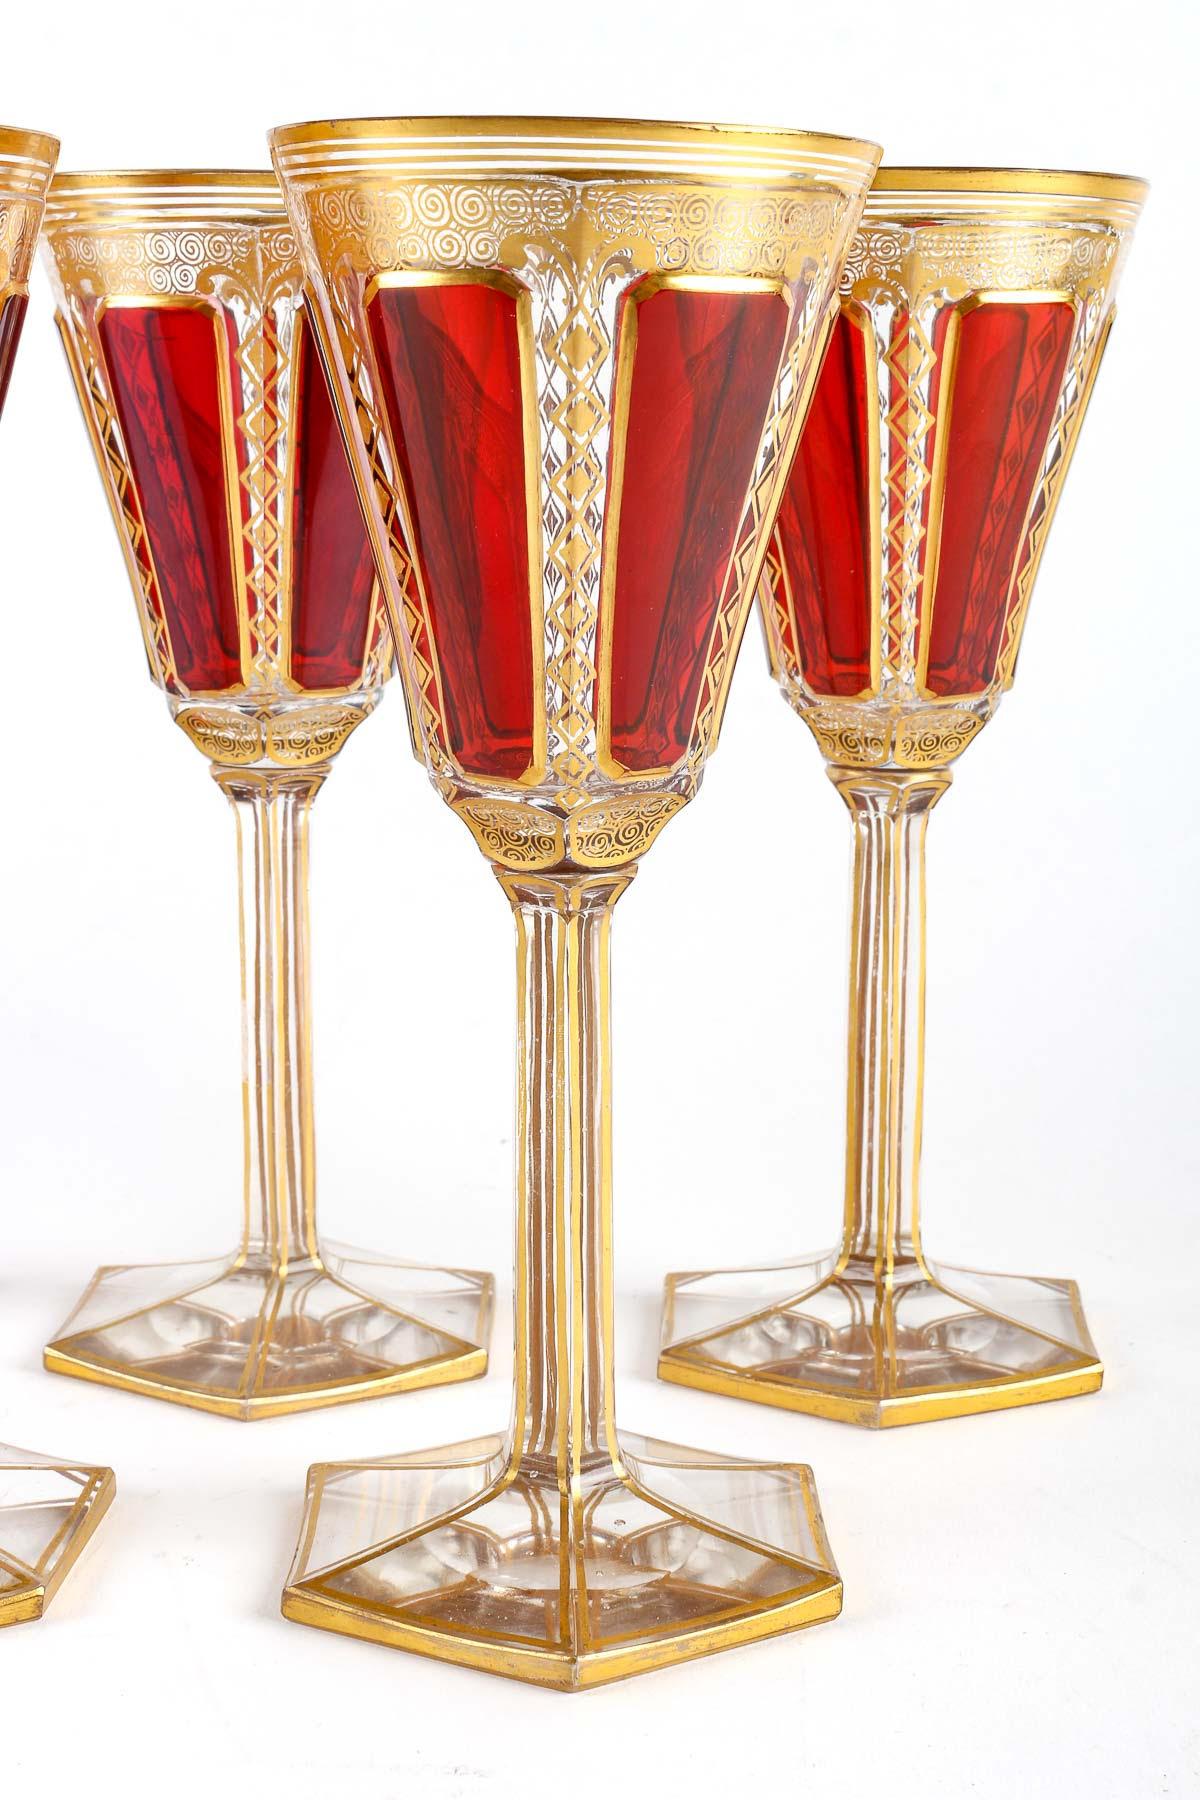 5 Bohemian Crystal Glasses, 19th Century. For Sale 1